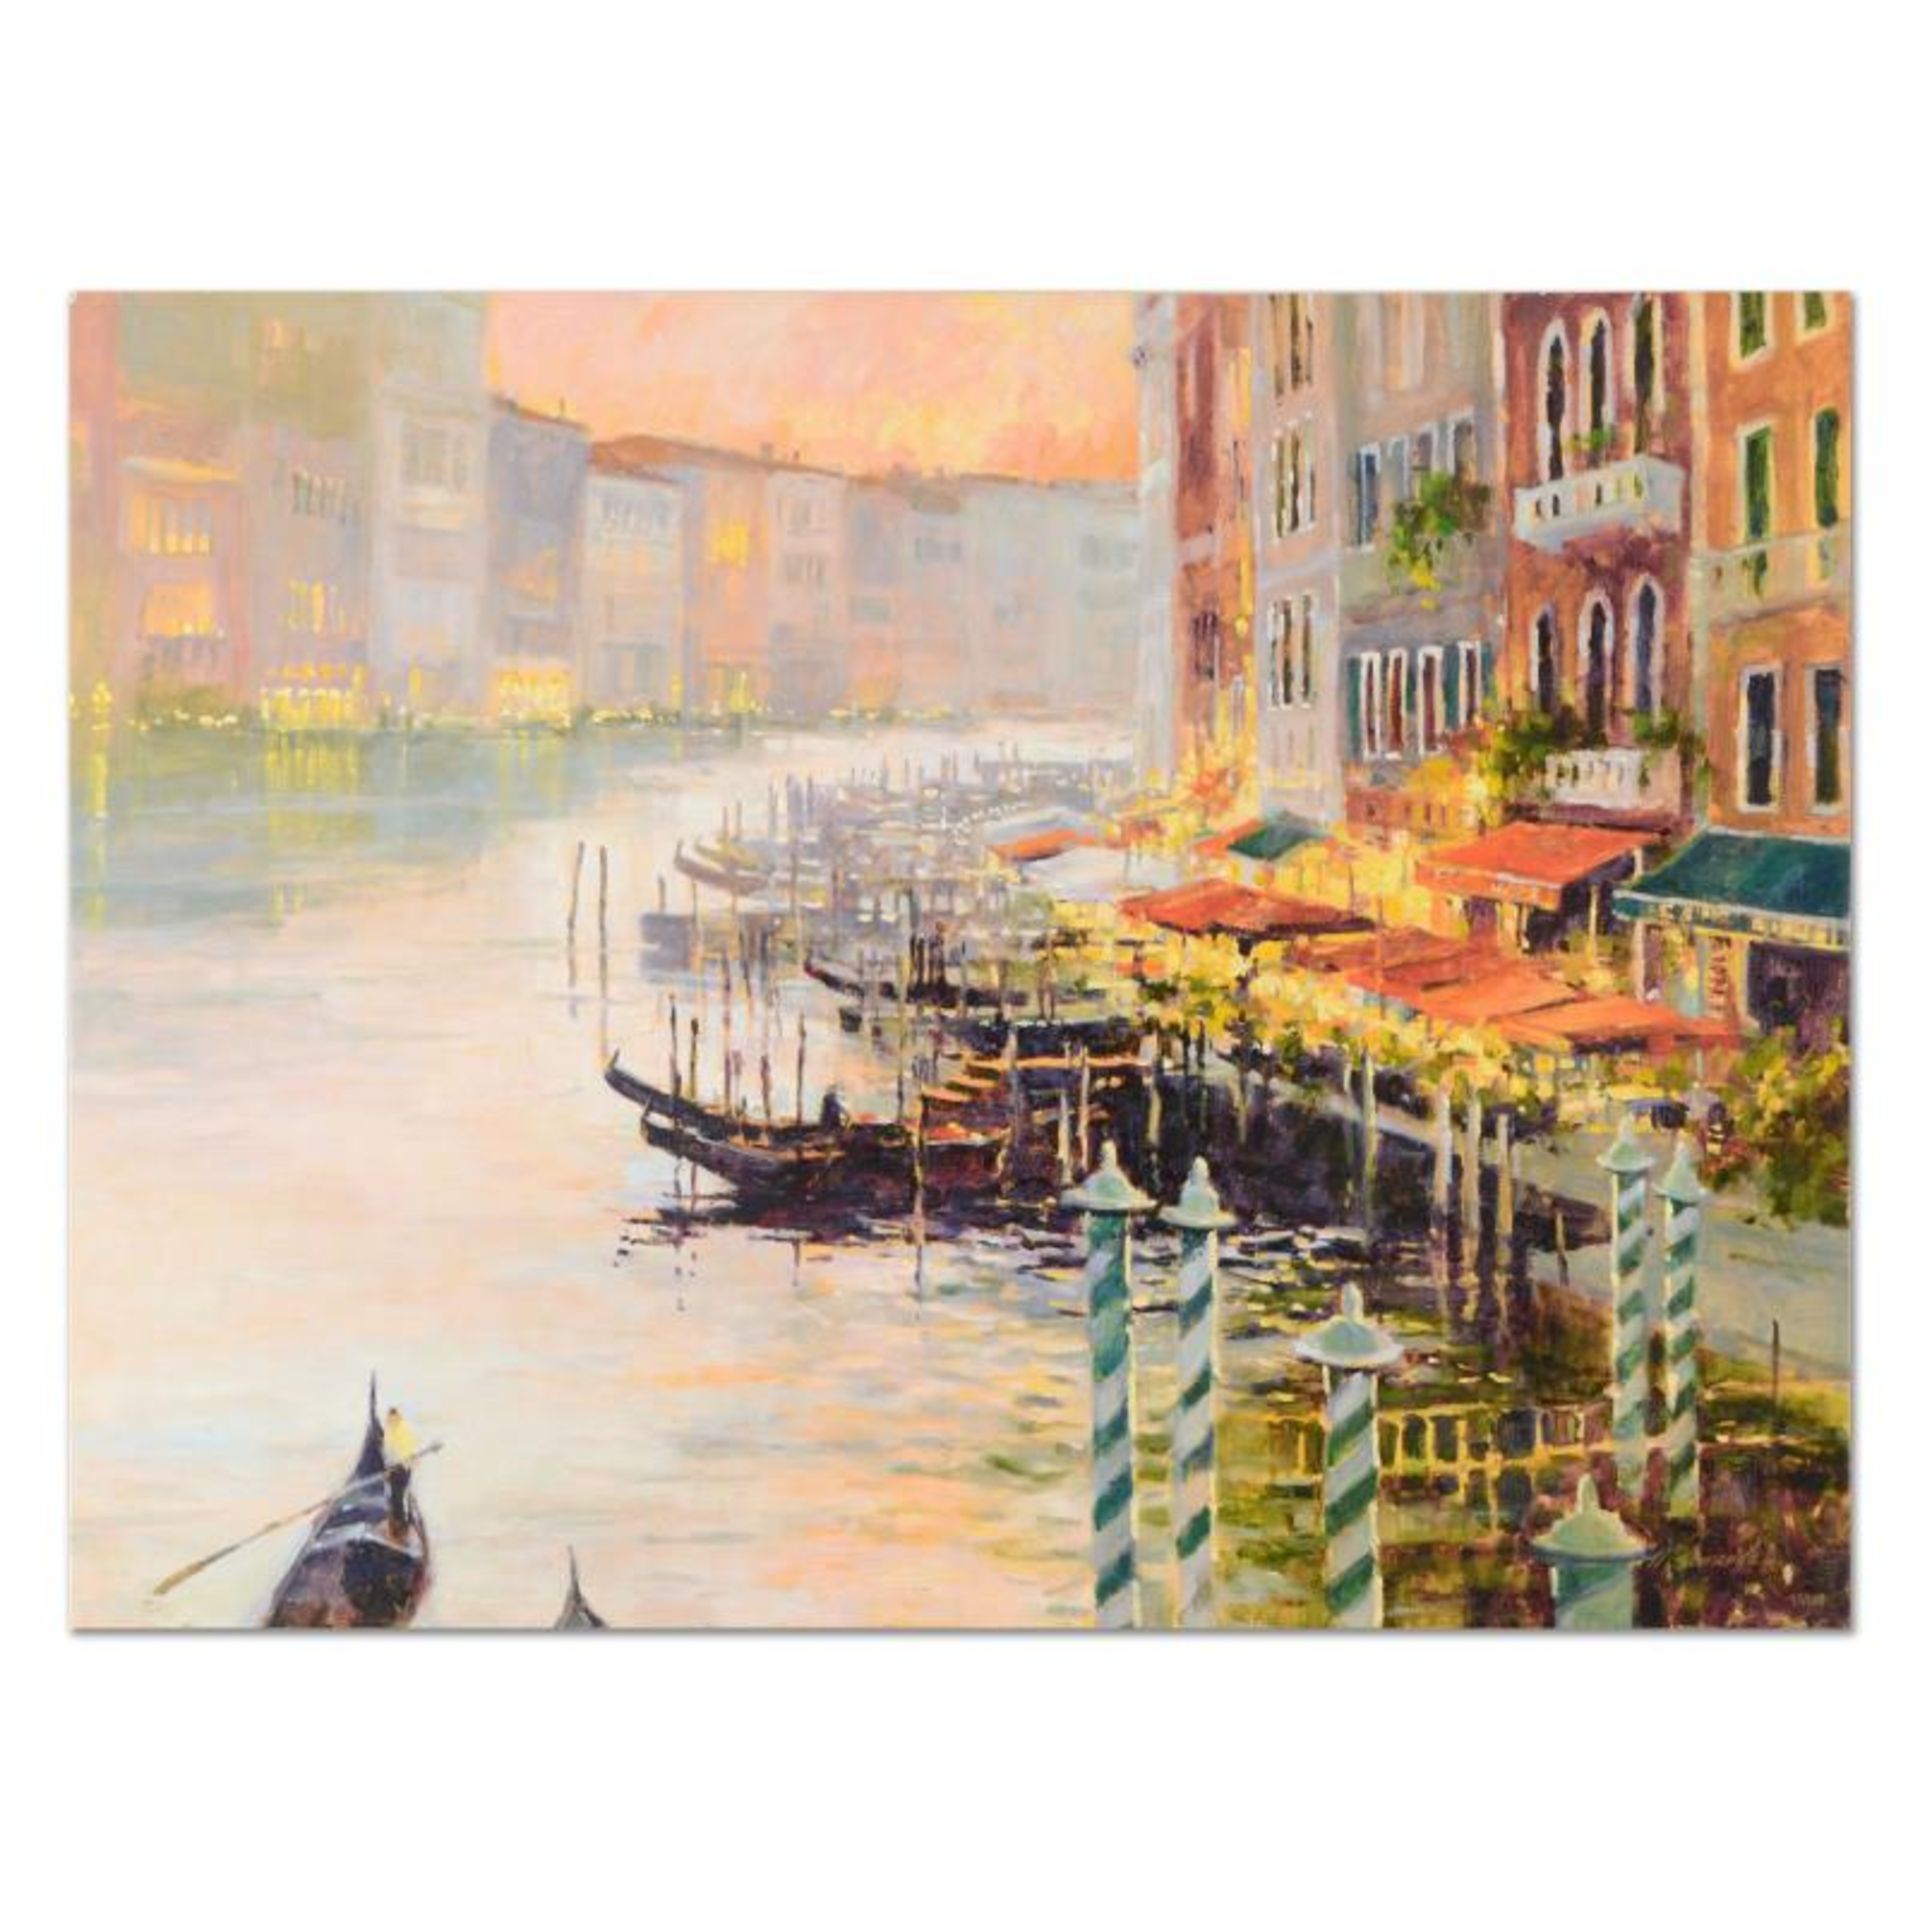 Marilyn Simandle, "Canal at Dusk" Limited Edition on Canvas, Numbered and Hand S